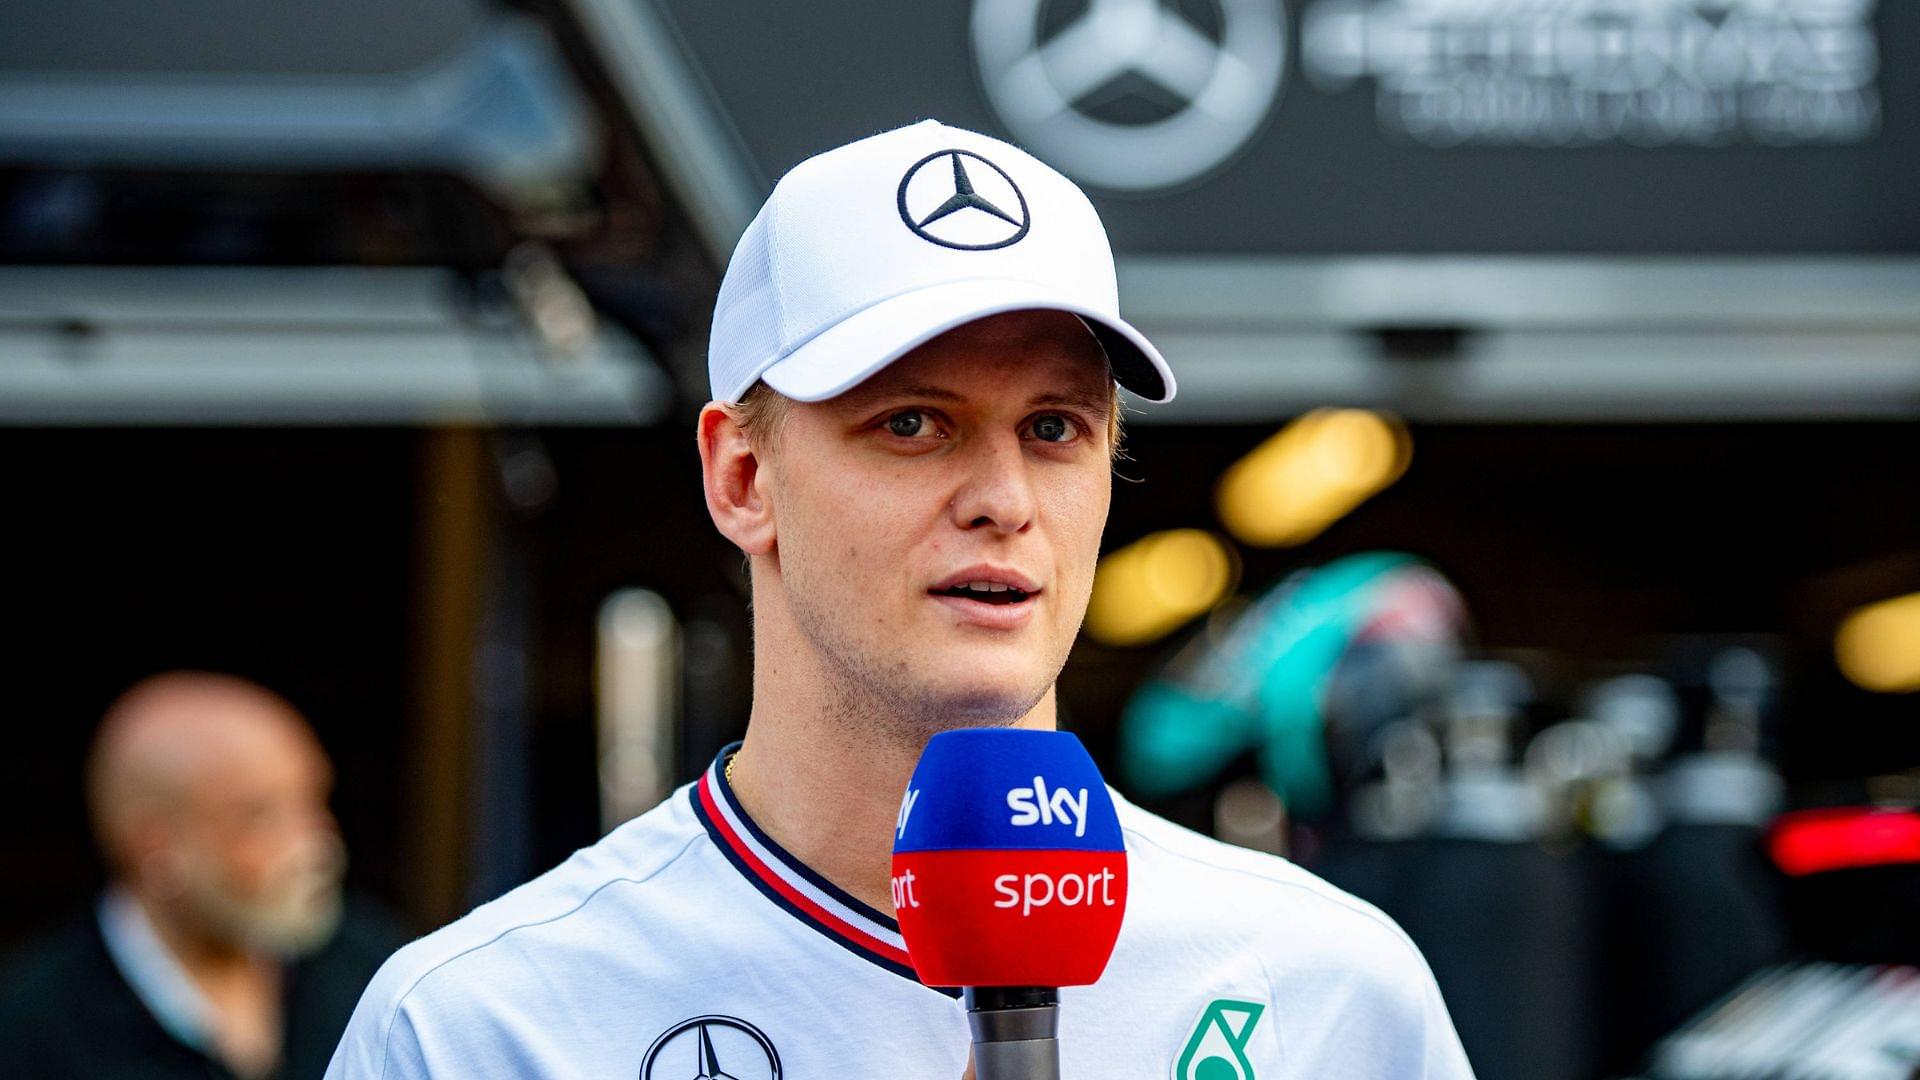 “We’re Talking To Mick”: Schumacher Might Follow His Father’s Footsteps as IndyCar Team Offers Seat